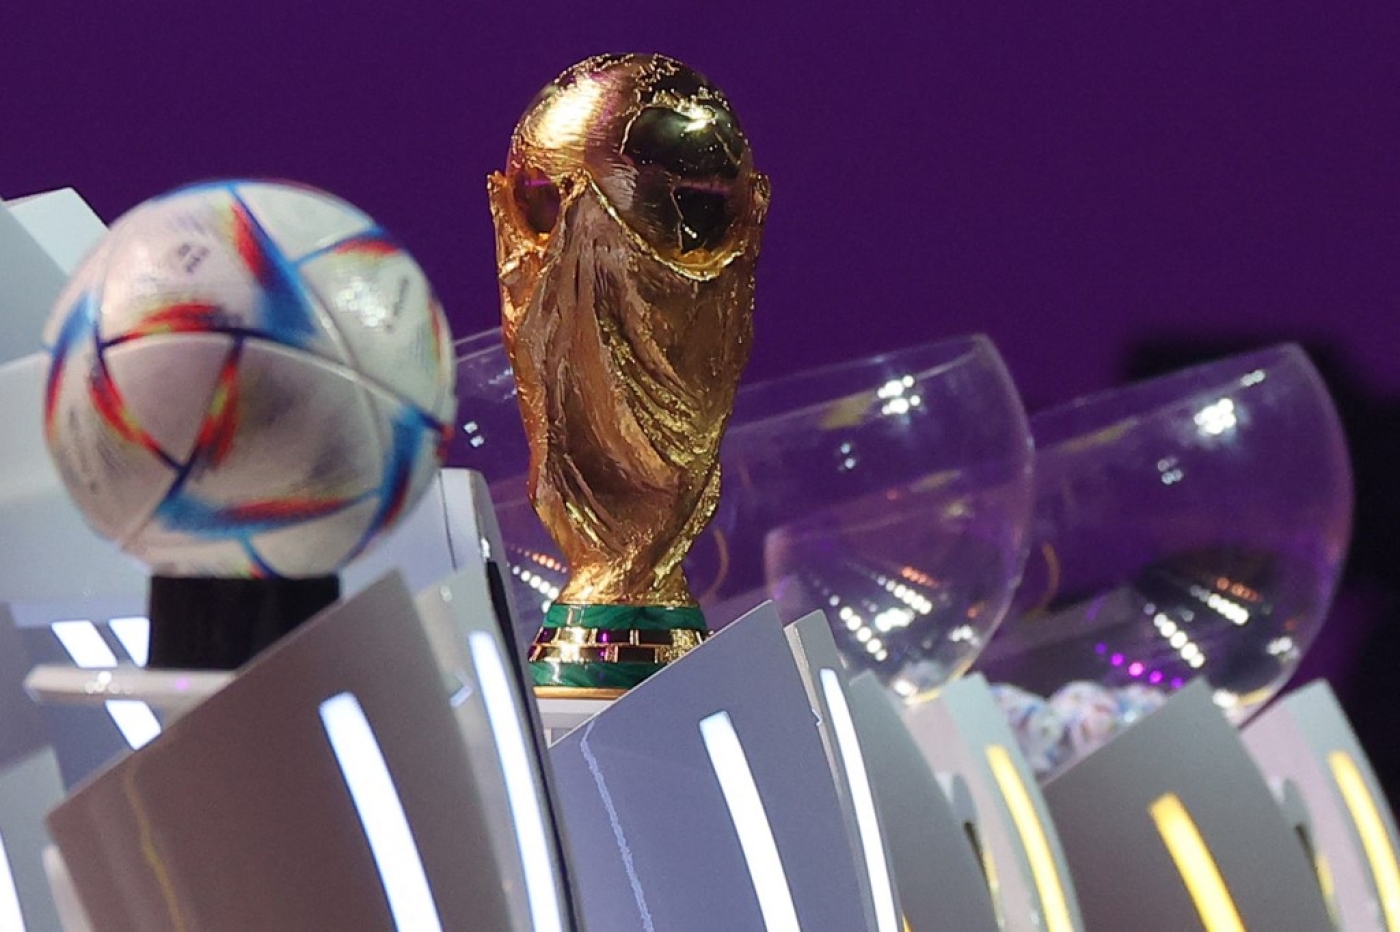 Israel may warn citizens against travelling to Qatar World Cup over security concerns - Middle East Eye